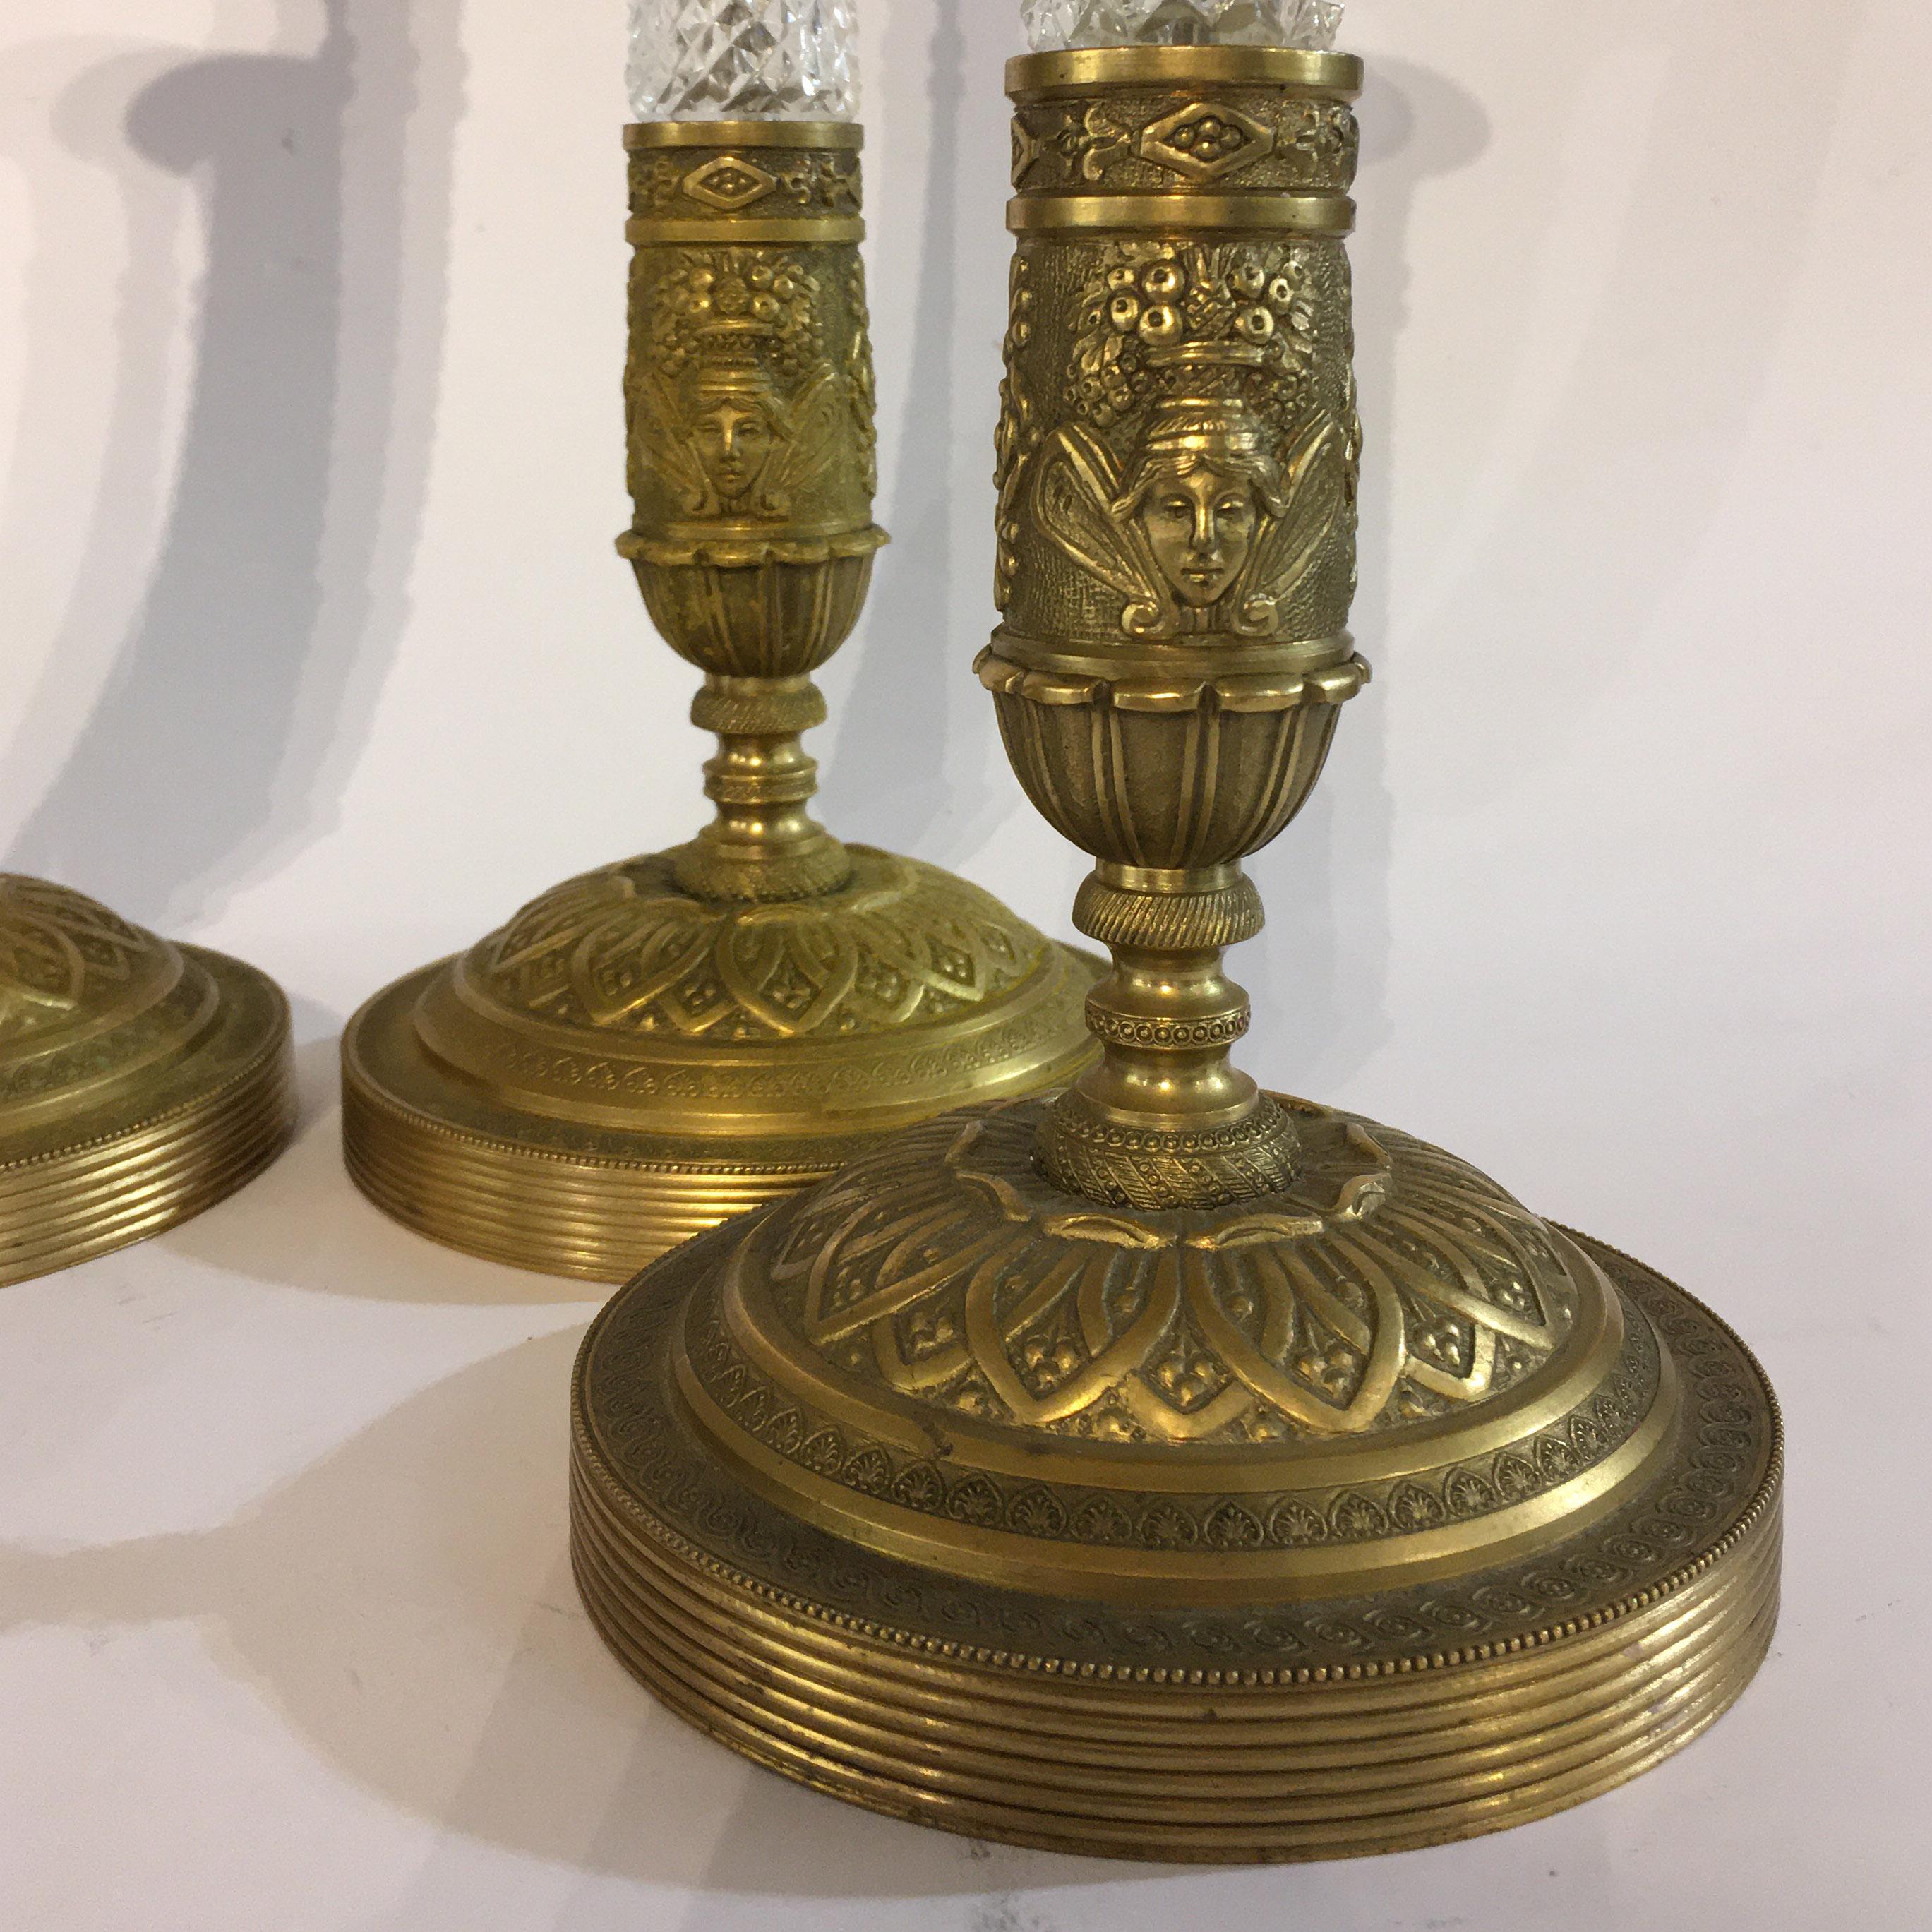 An elegant set of four candlesticks, which are made from gilt bronze and grinded crystal.
Italian manufactory from the second half of the 19th century.
  